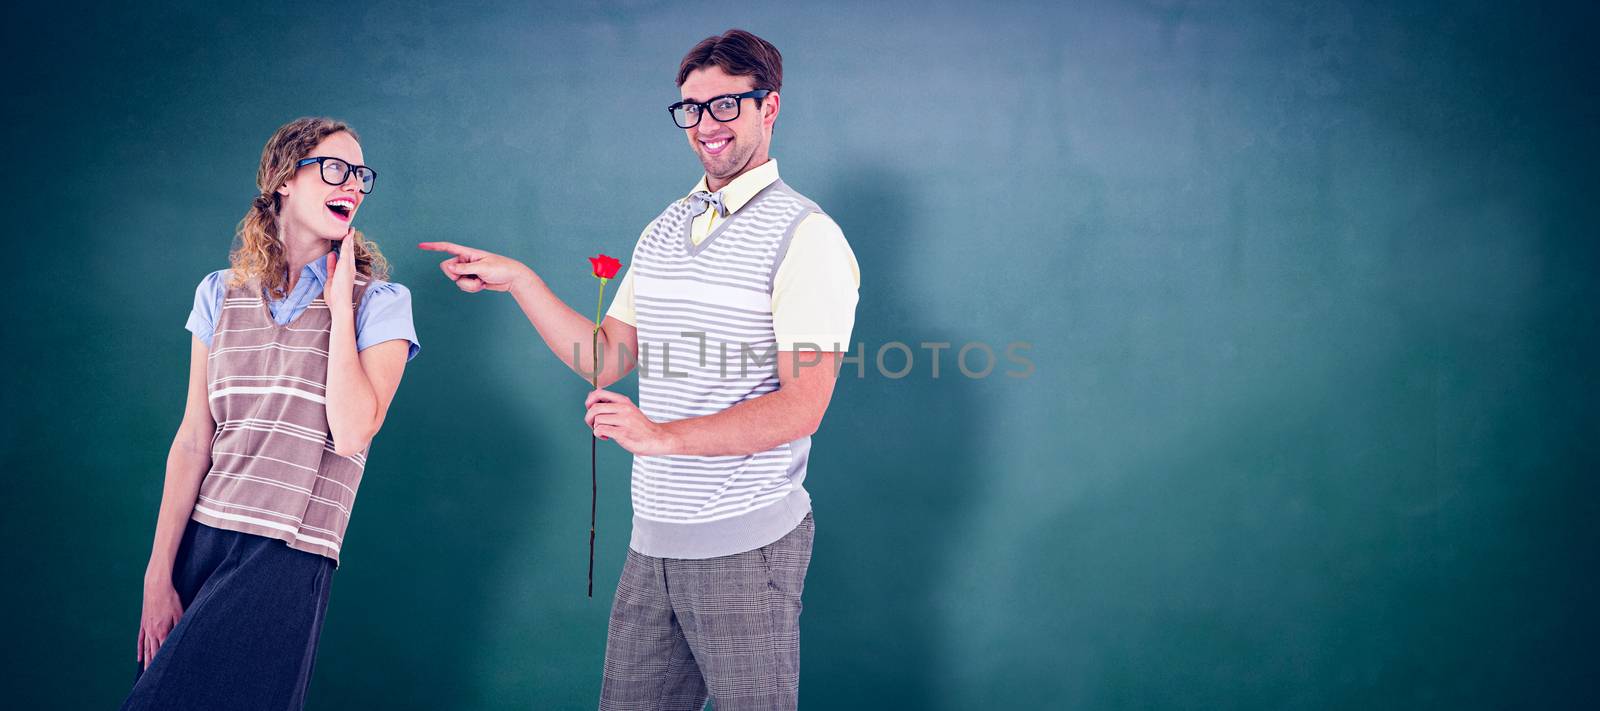 Composite image of geeky hipster holding rose and pointing his girlfriend  by Wavebreakmedia